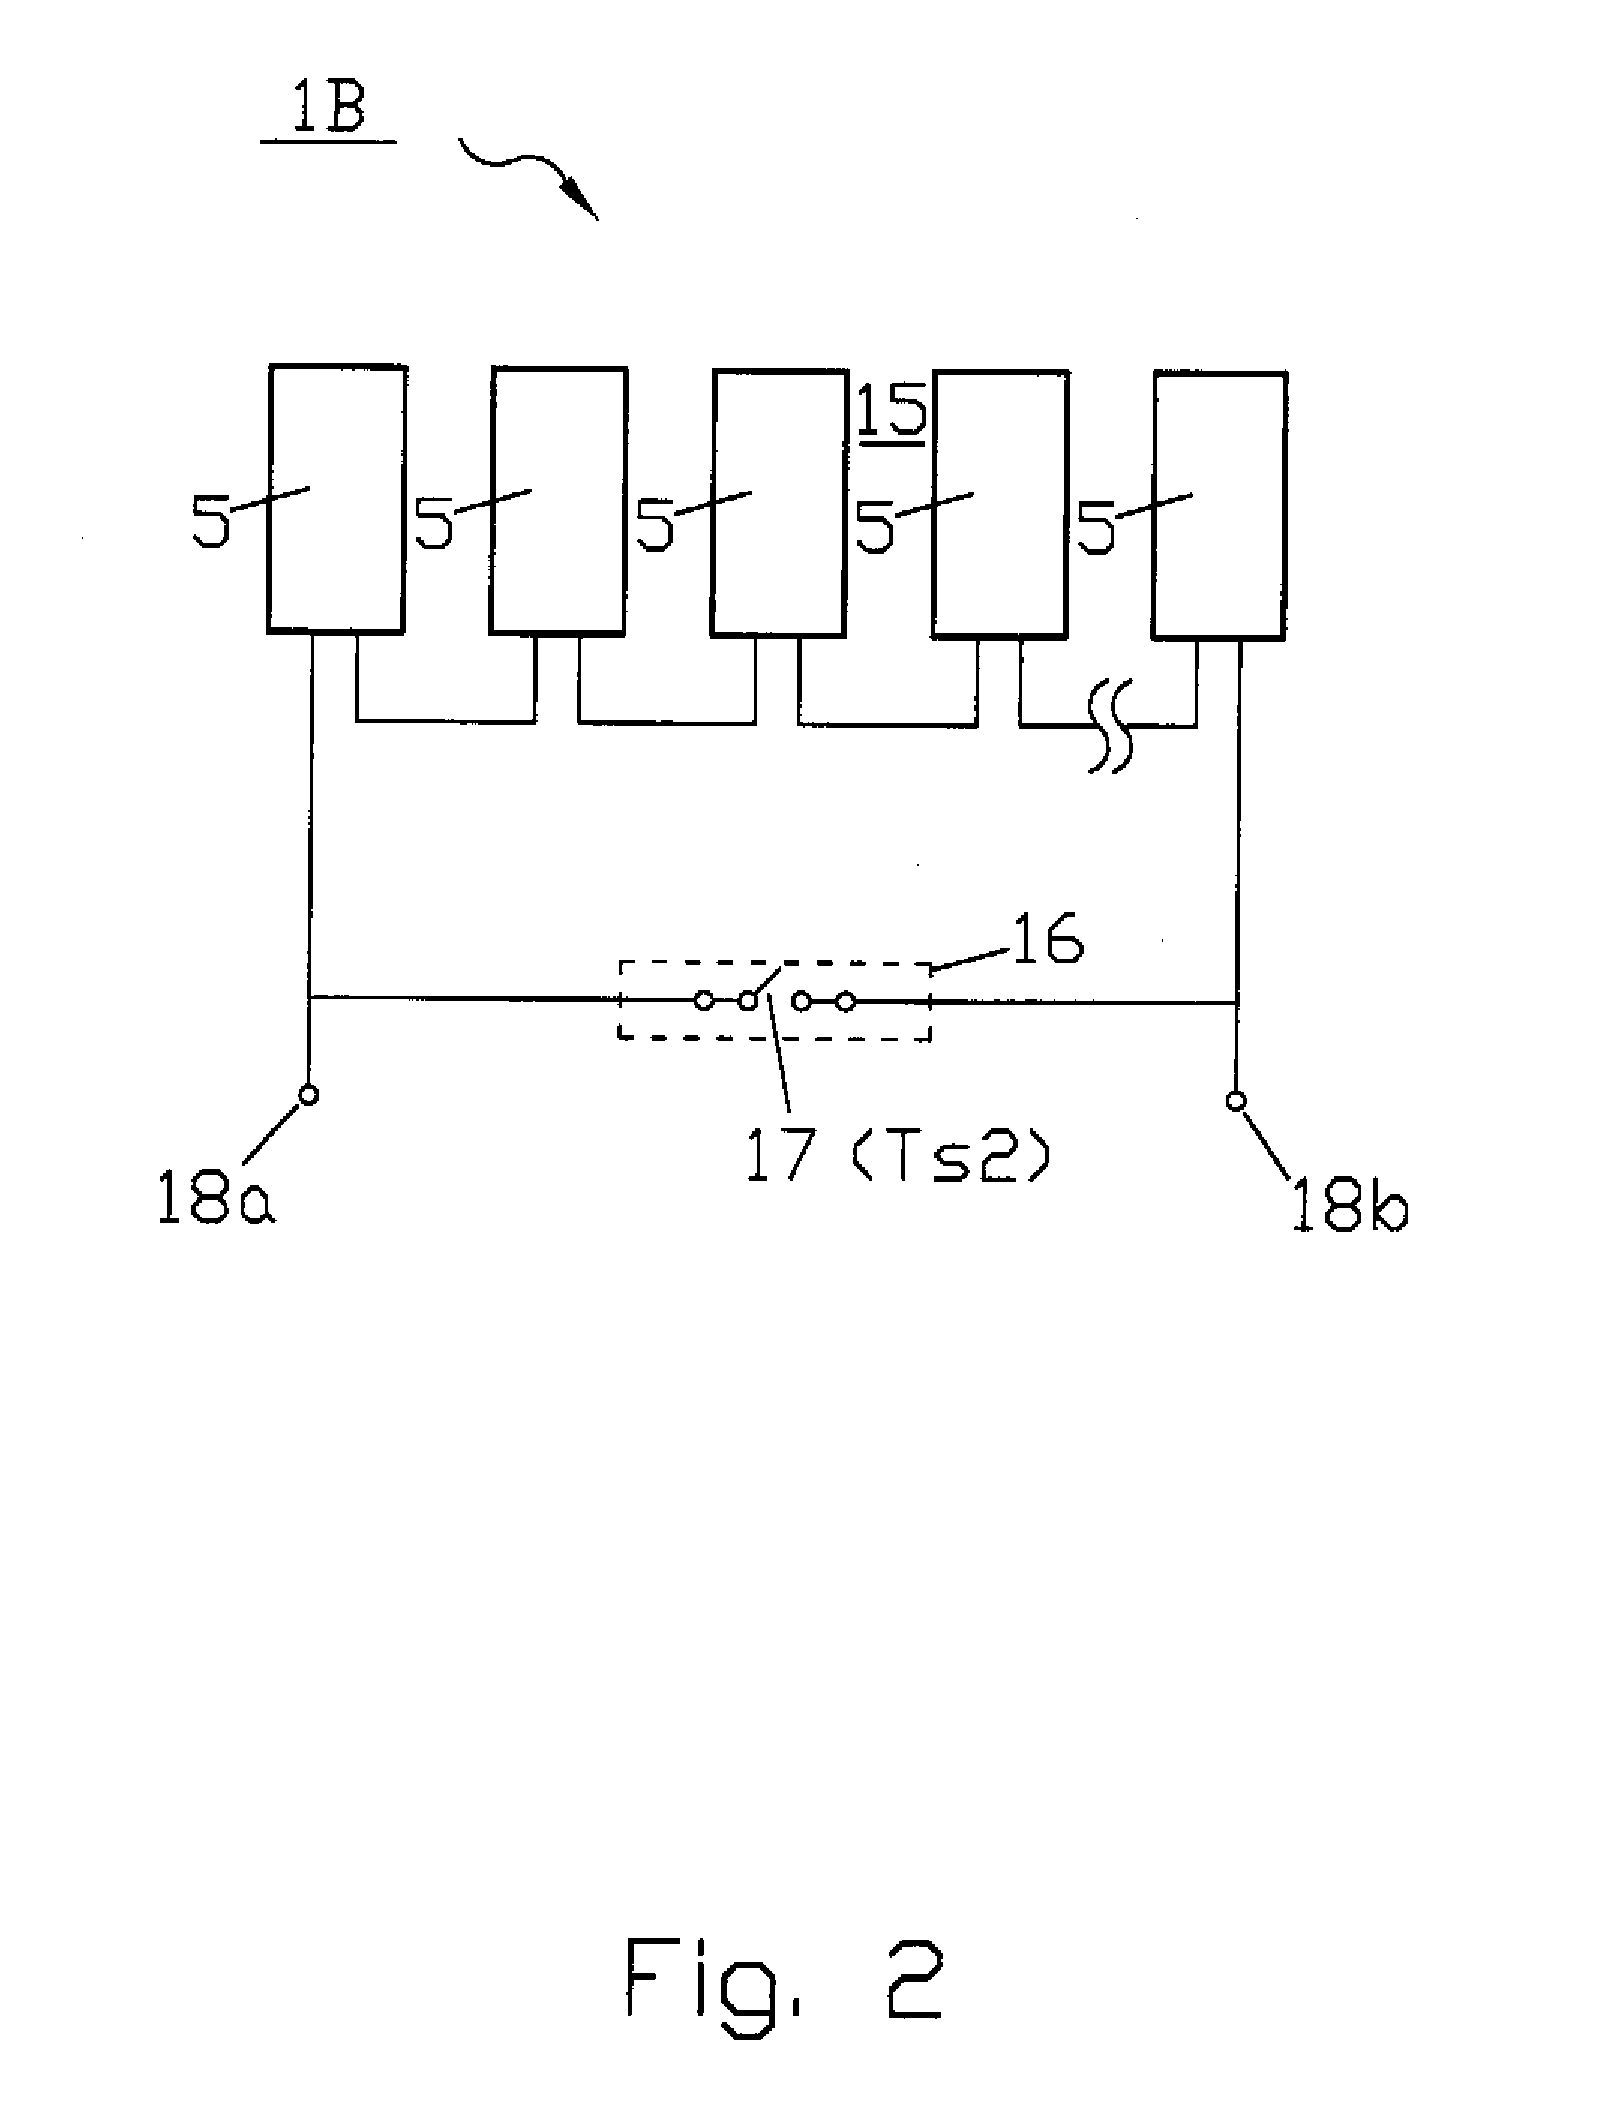 Photovoltaic generator with thermo switch element